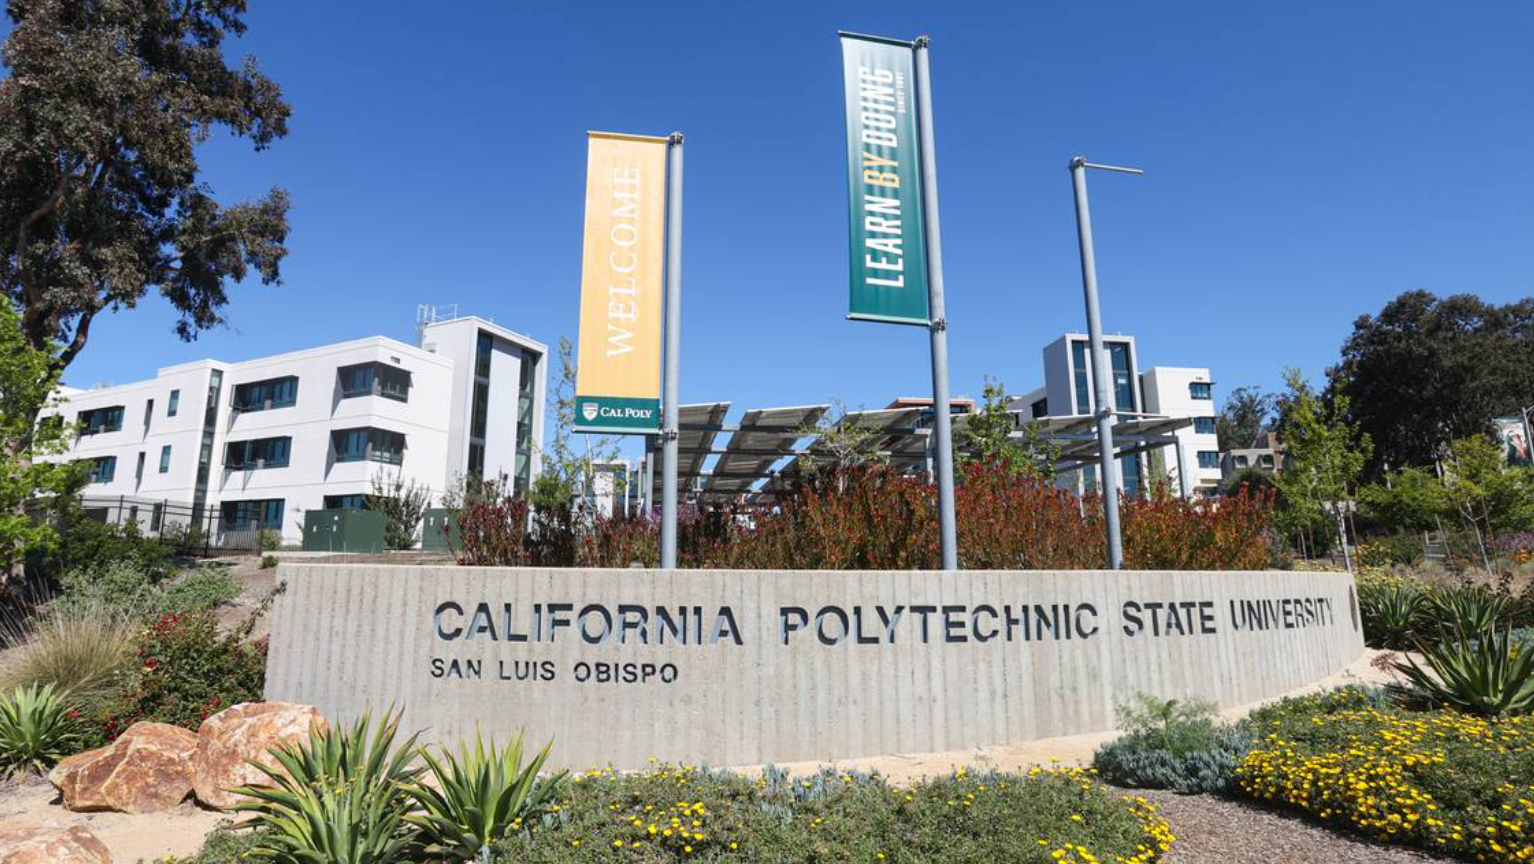 Steps to Improve your Cal Poly Admissions Chances